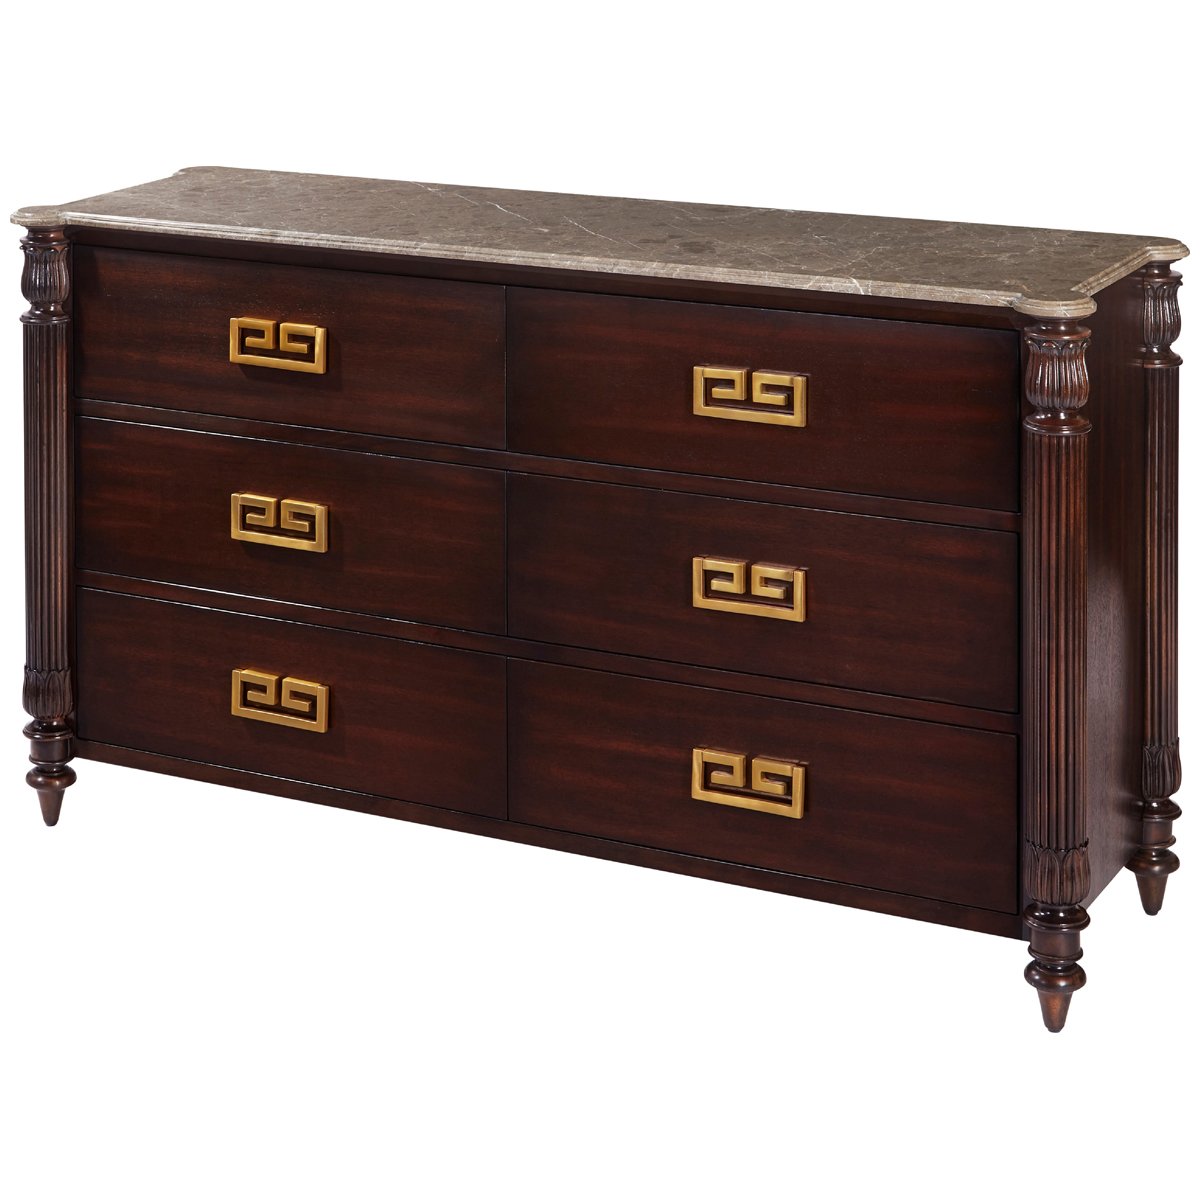 Theodore Alexander Duane Marble Commode